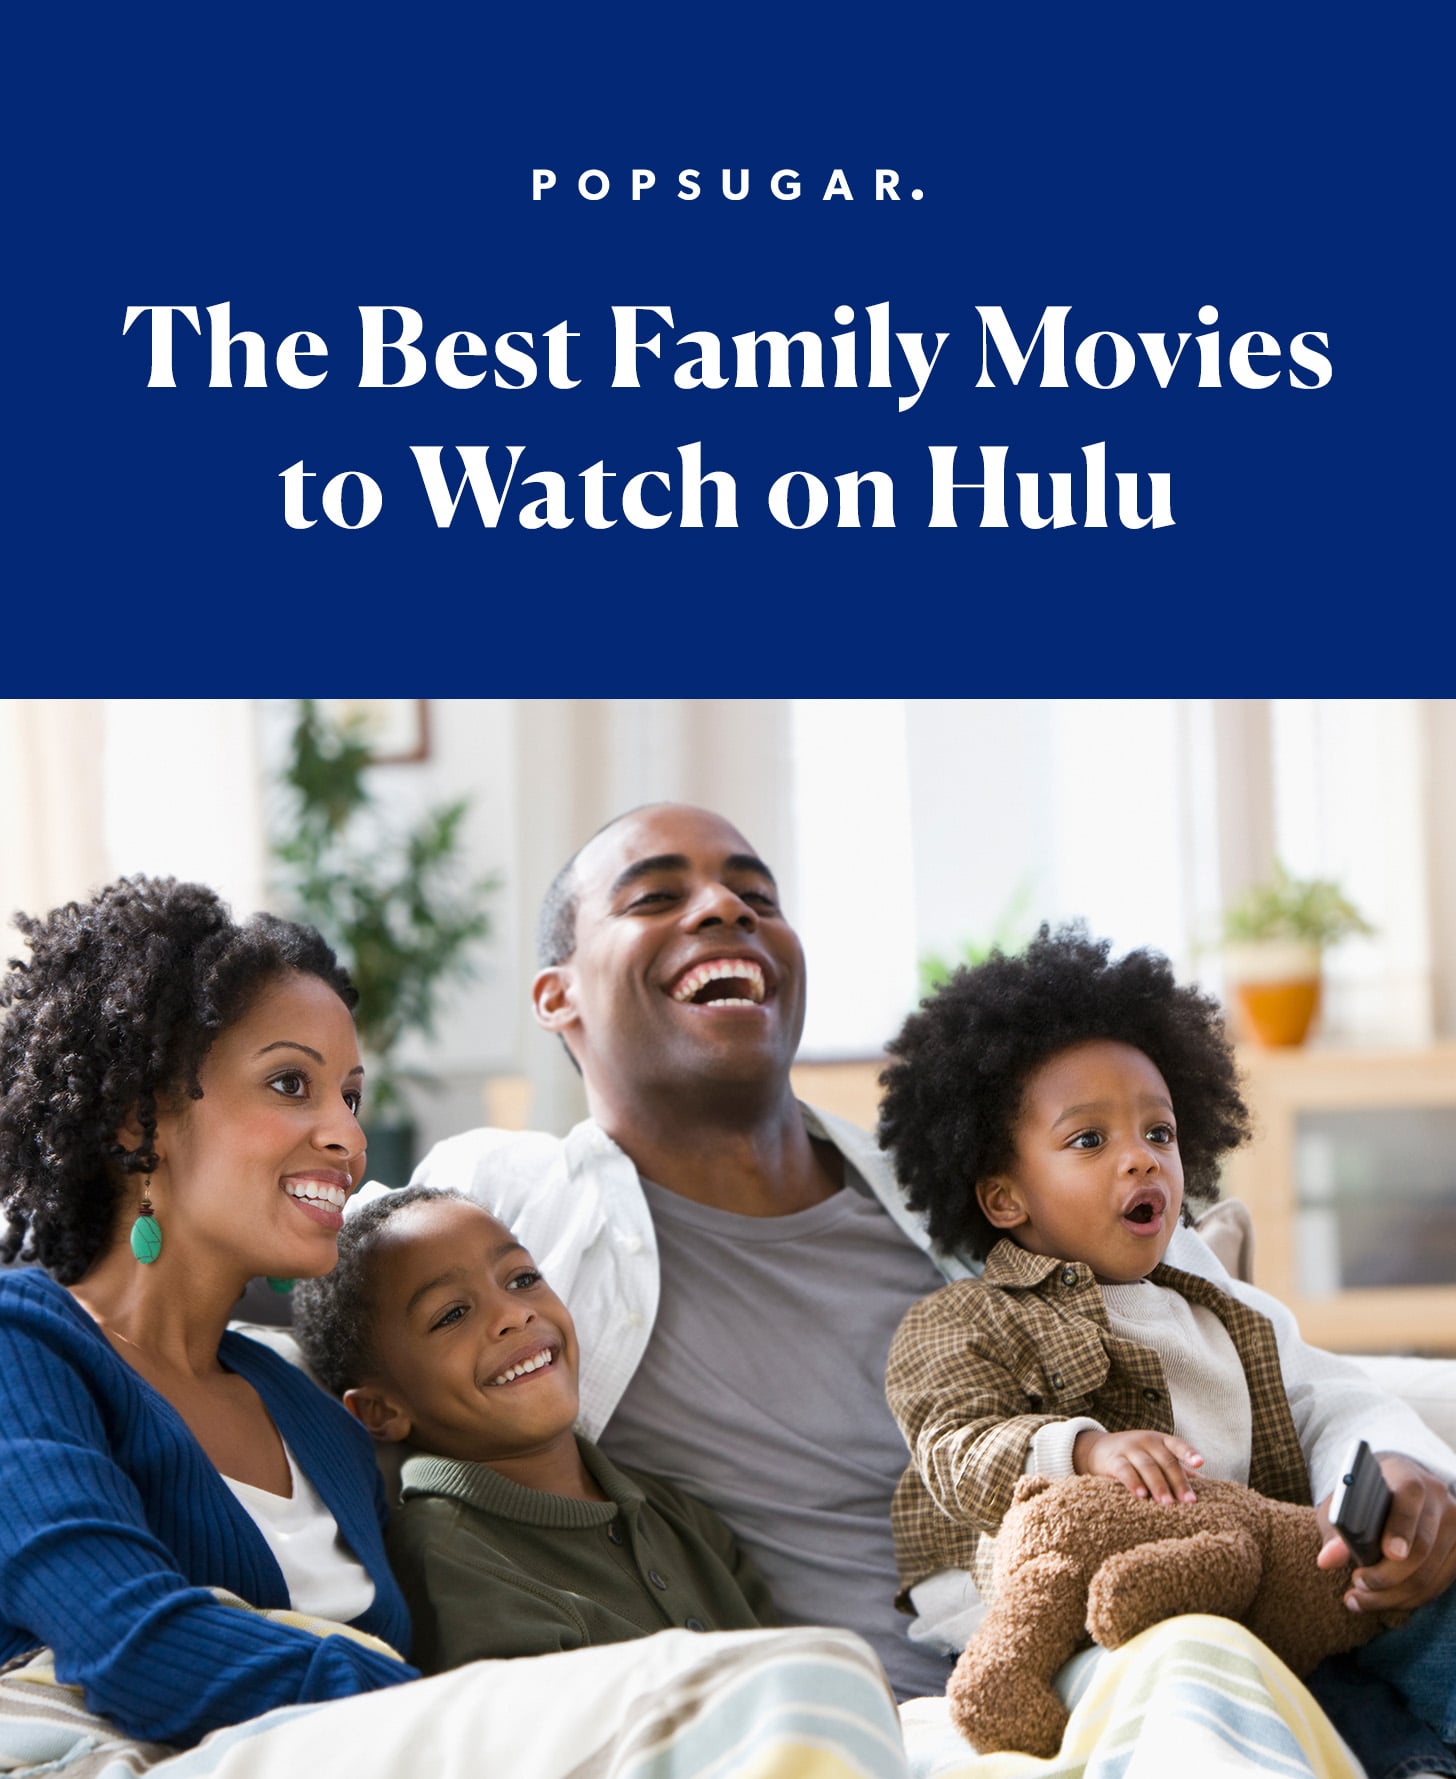 What Family Movies Are On Hulu - The 30 Best Kids Movies On Hulu In 2020 Purewow / So we've picked out the best.